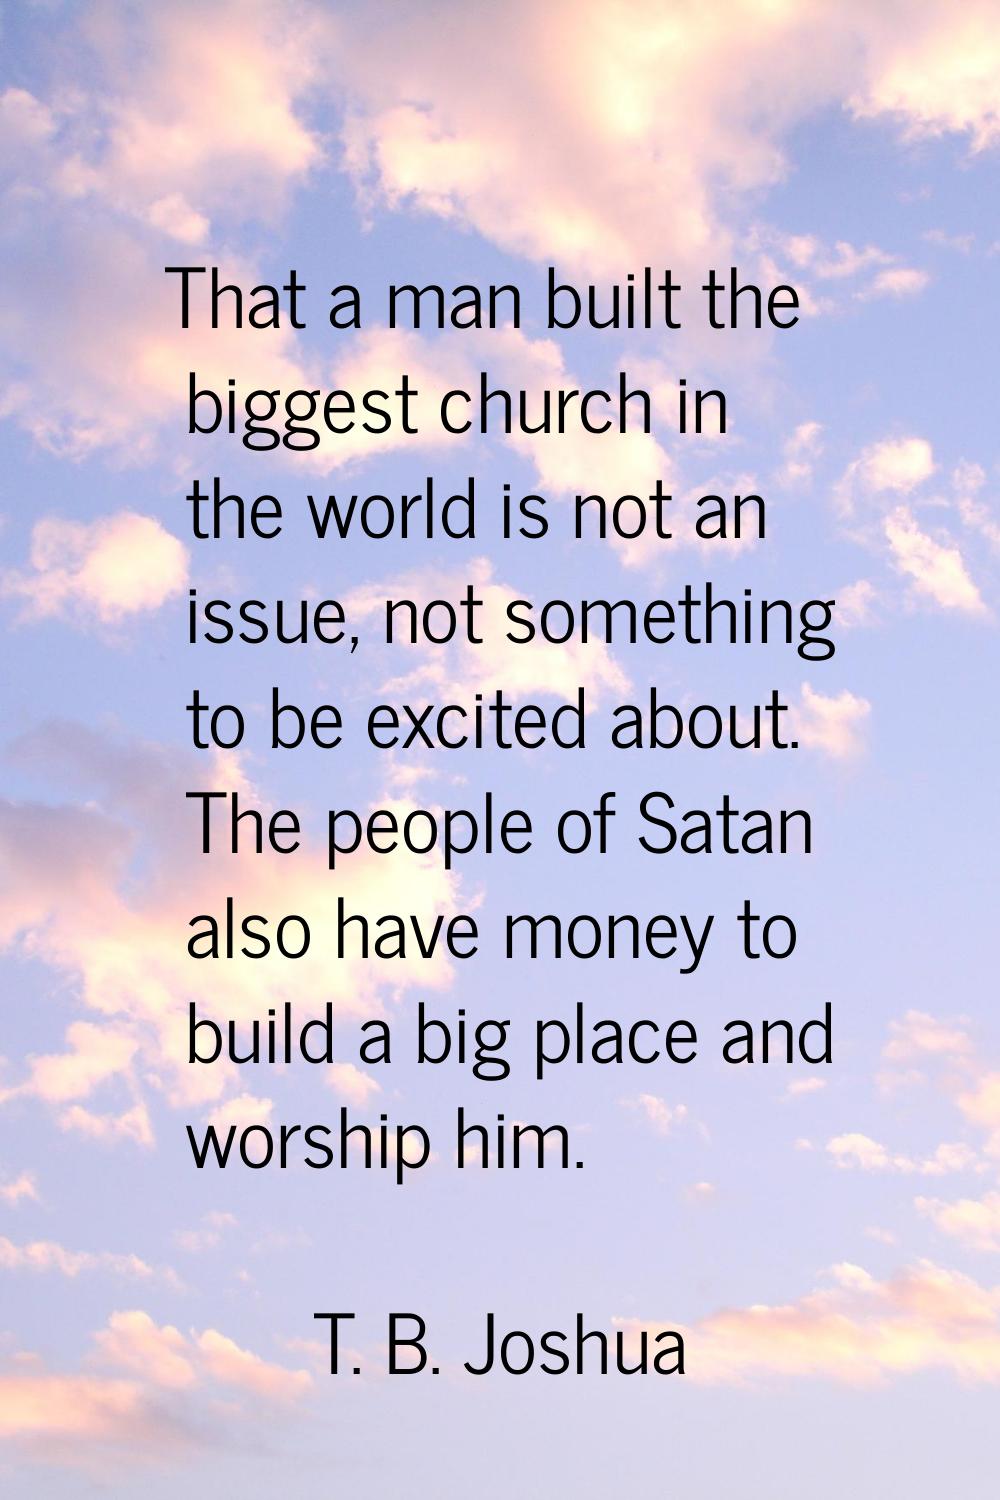 That a man built the biggest church in the world is not an issue, not something to be excited about